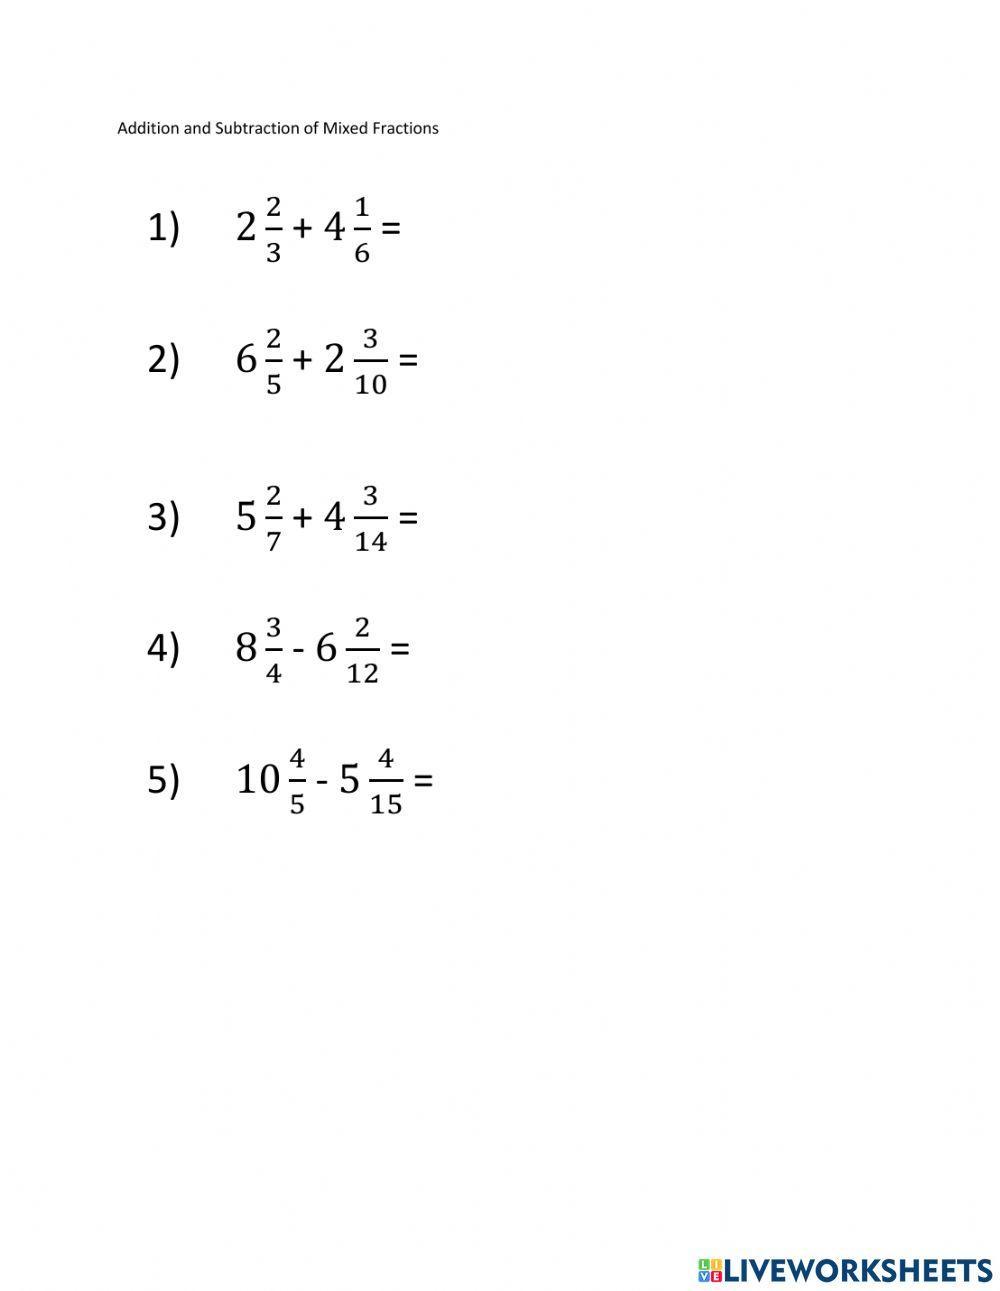 Addition and subtraction of mixed fractions